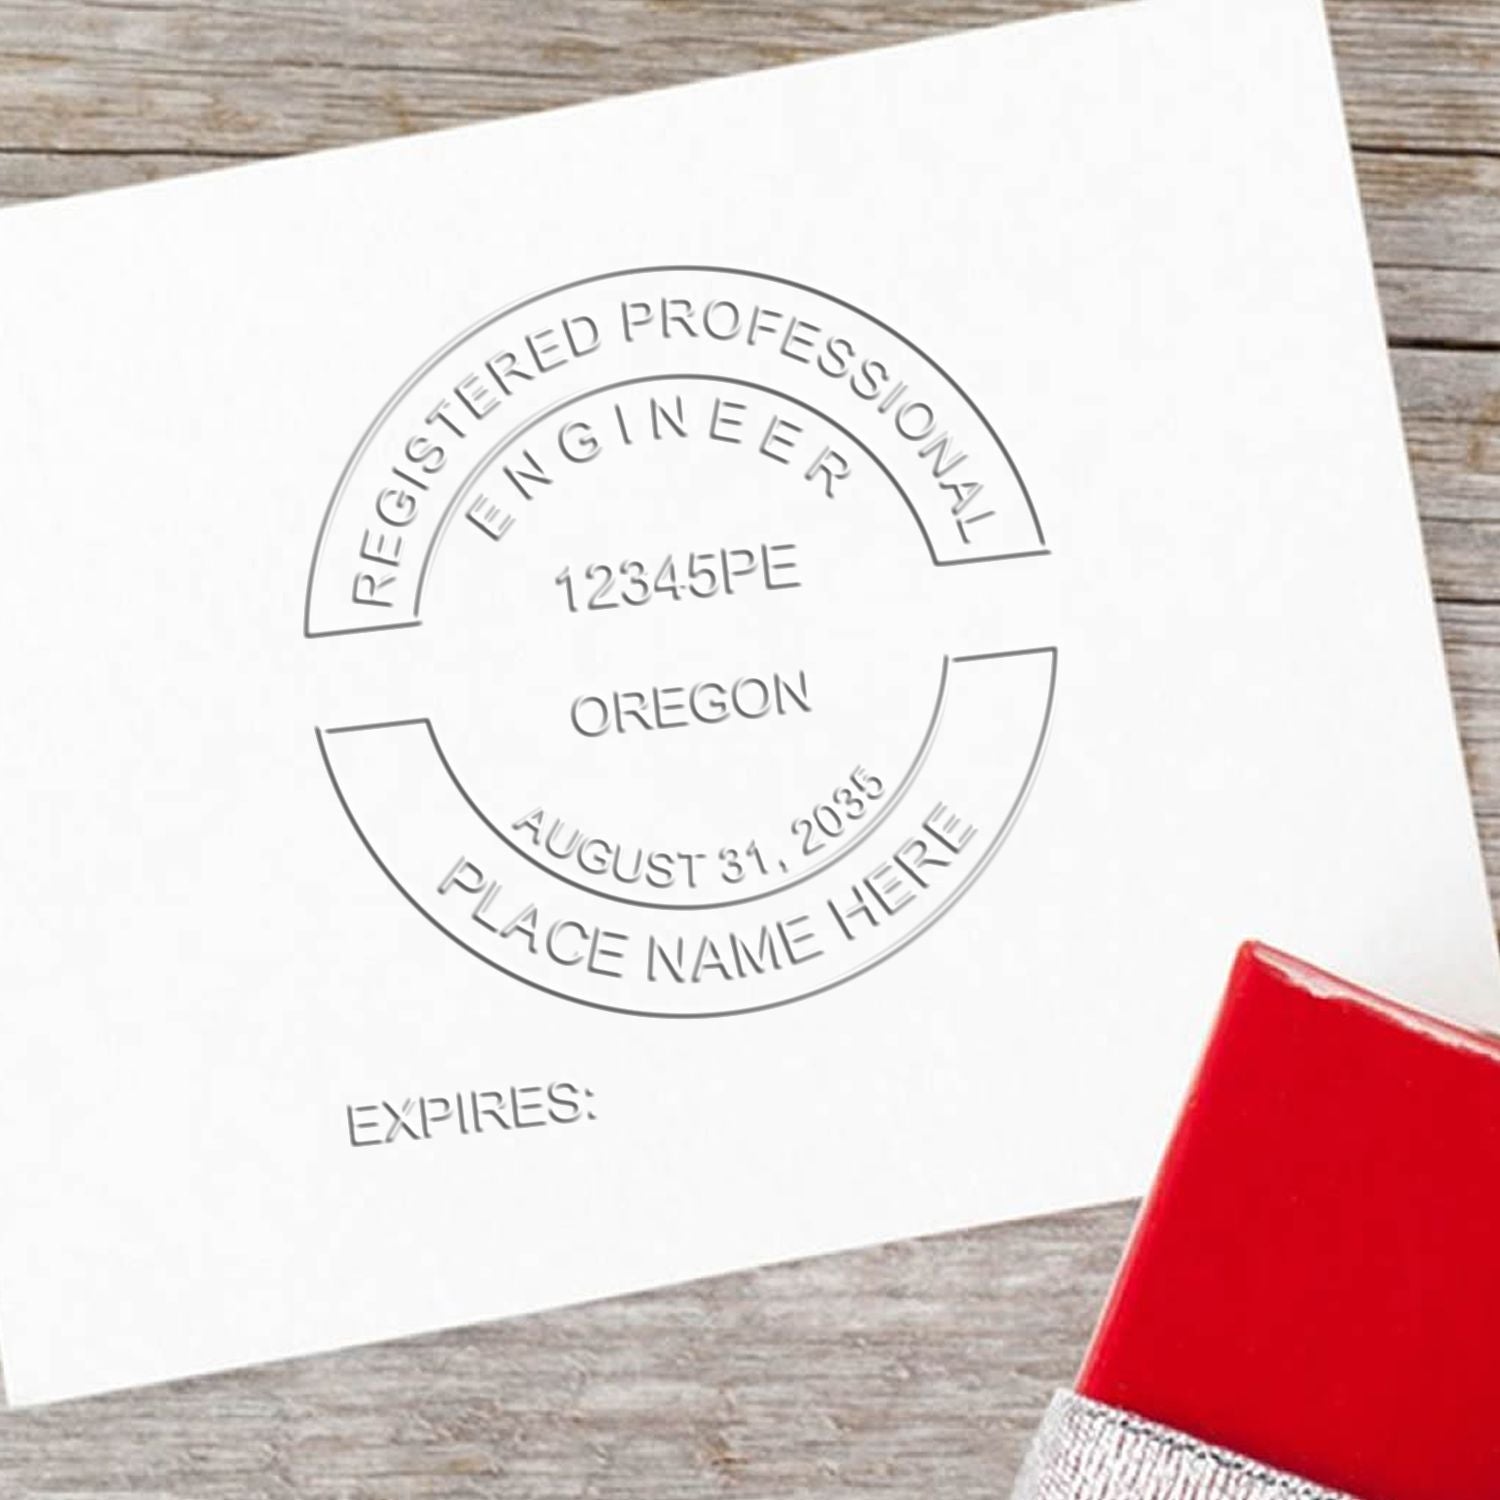 A photograph of the Soft Oregon Professional Engineer Seal stamp impression reveals a vivid, professional image of the on paper.